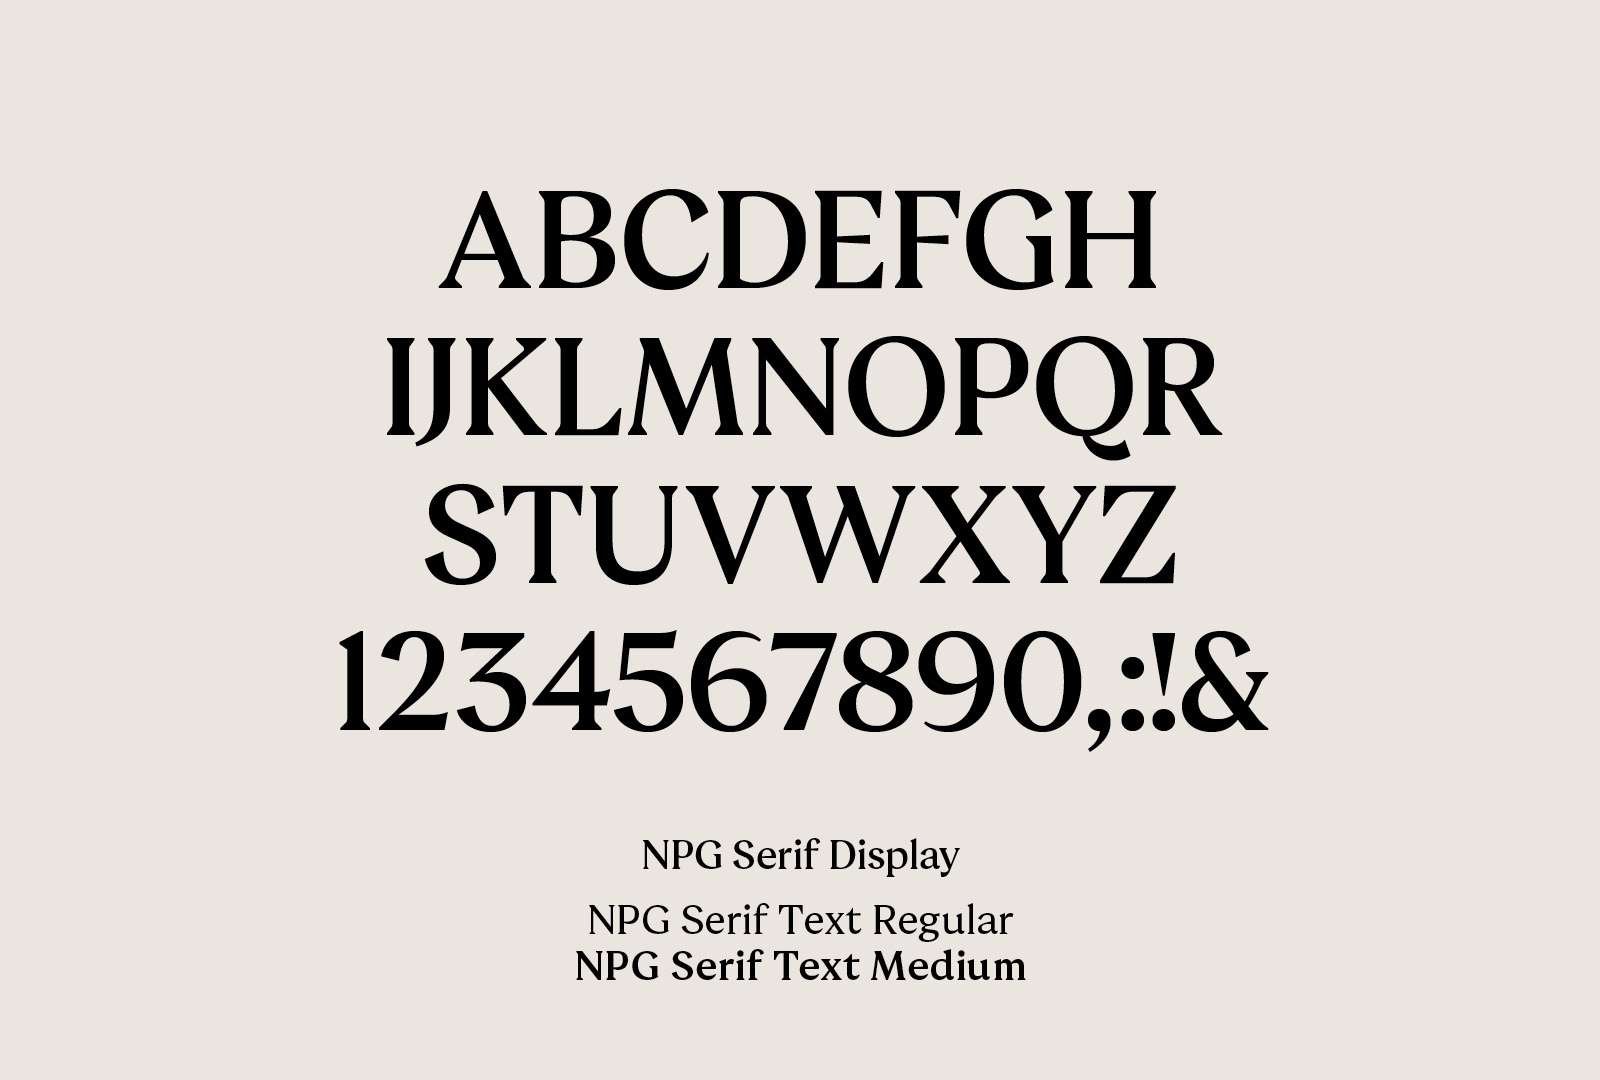 New monogram, custom typeface and brand identity designed by Edit Brand Studio for London's National Portrait Gallery